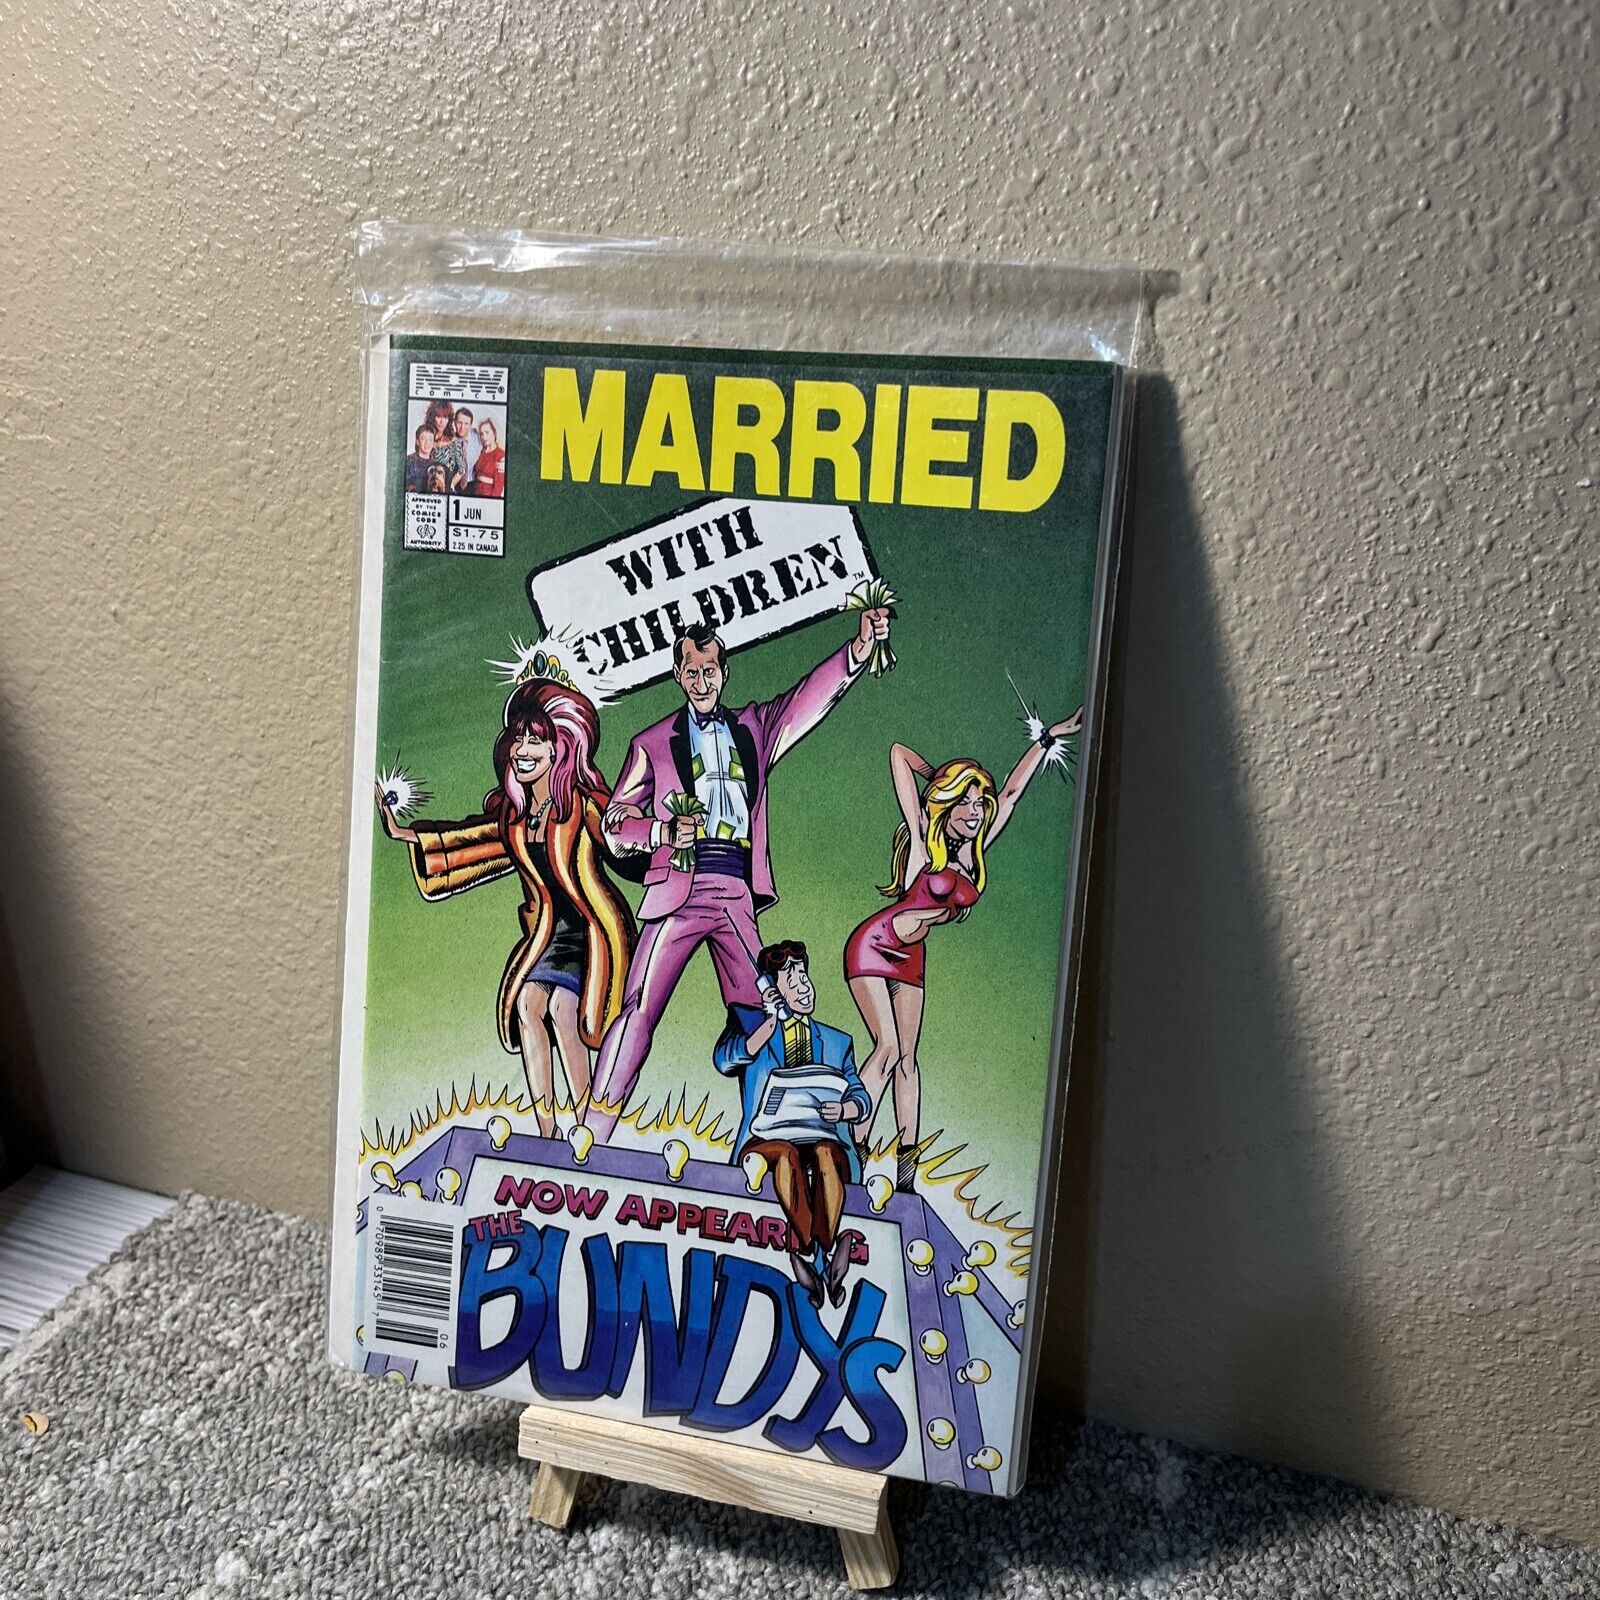 Married with Children BUNDYS NOW Comics Comic Book. New Issue #1 June 1990